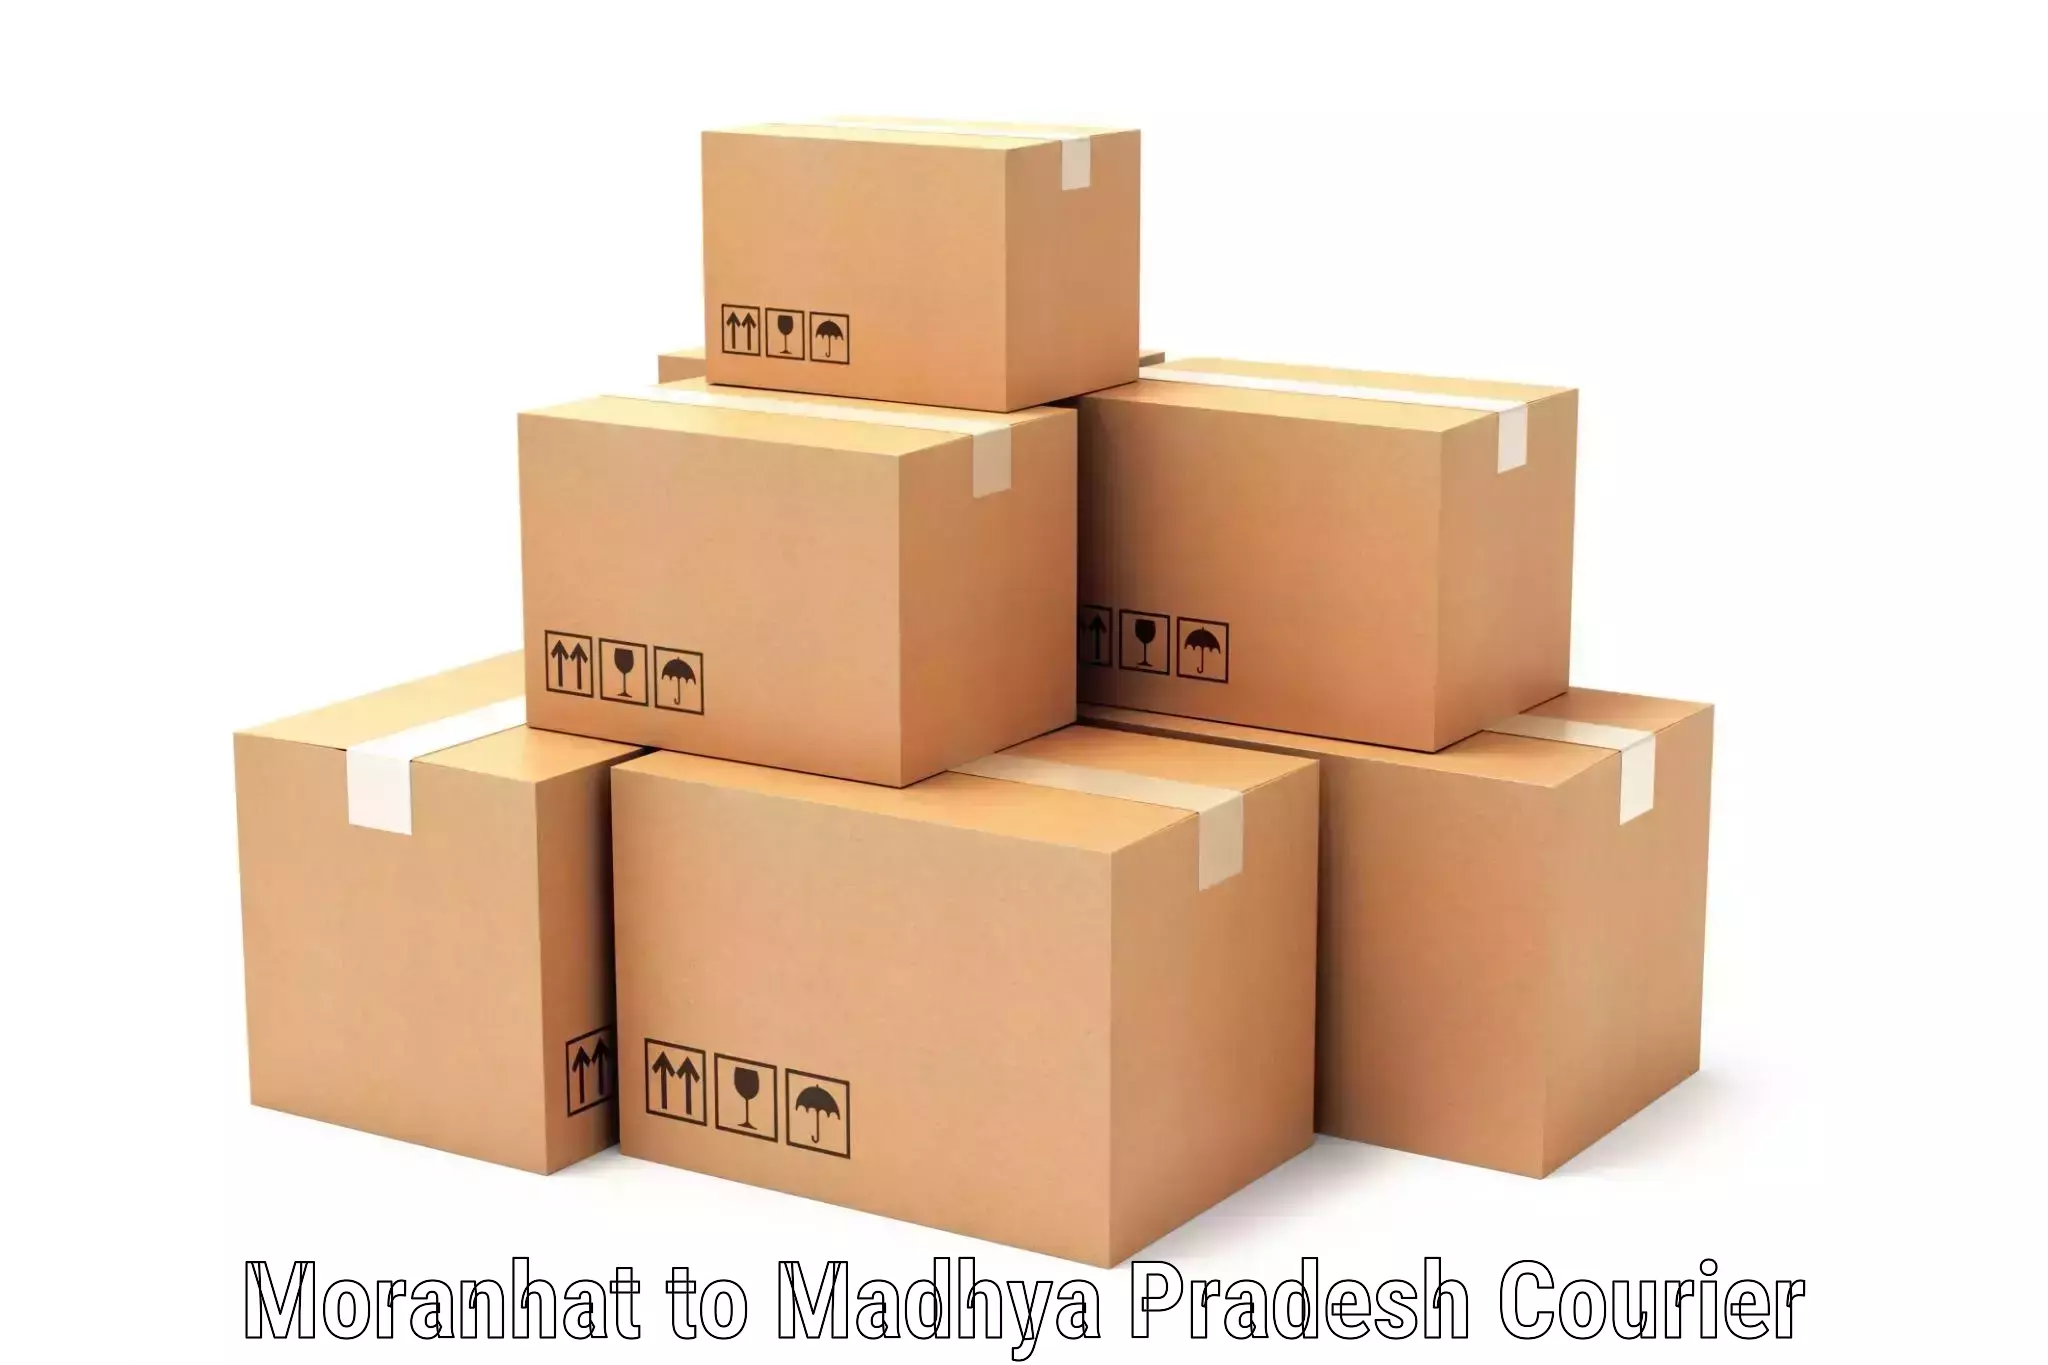 24-hour courier service Moranhat to Khandwa